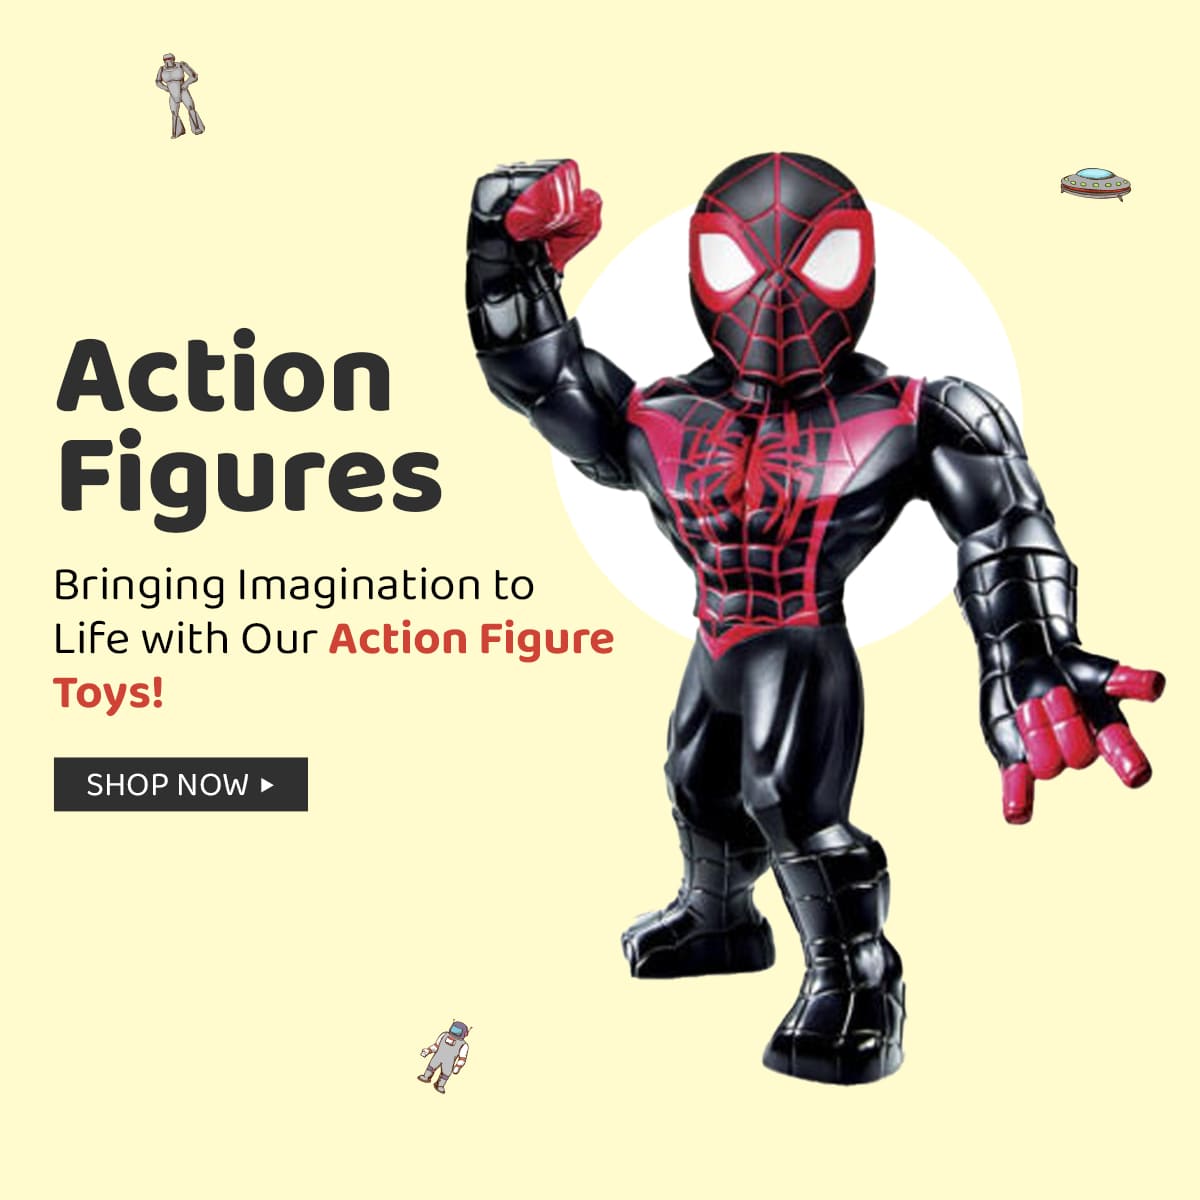 Action figure toys